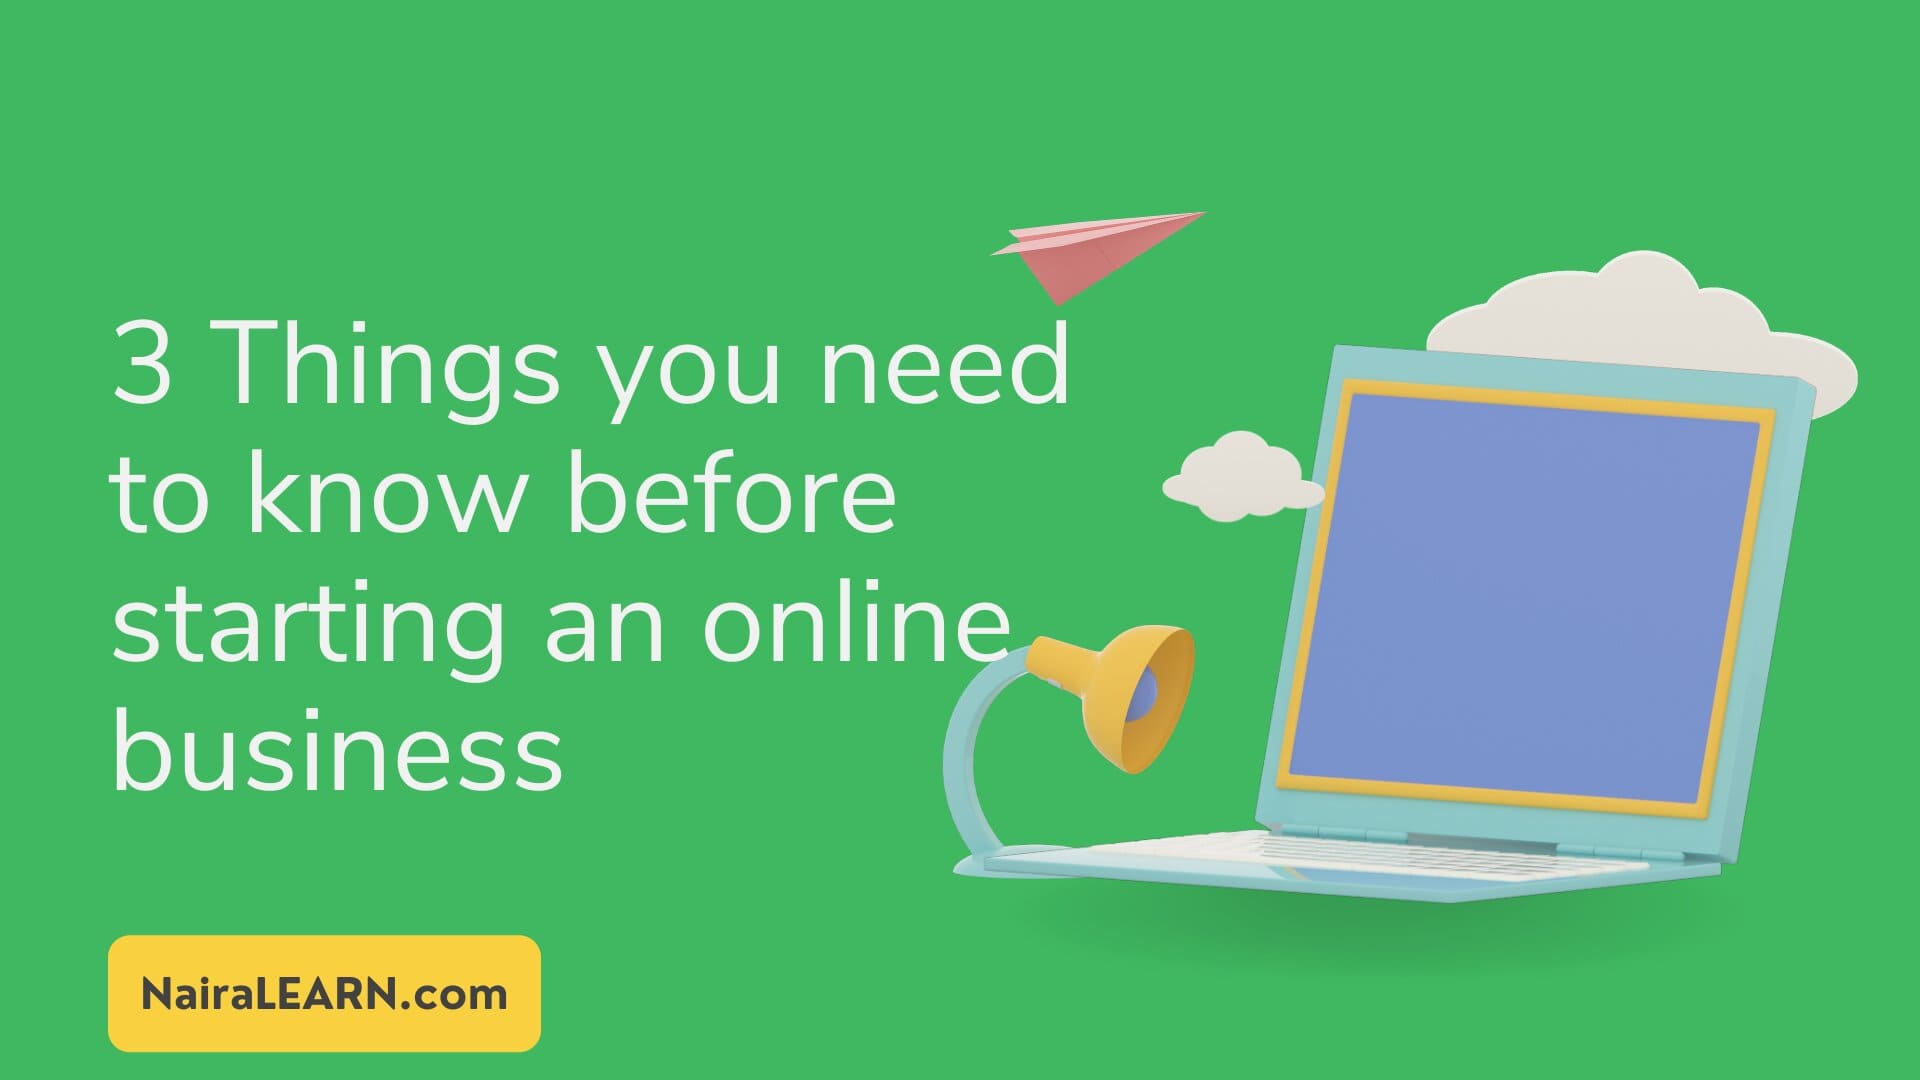 3 Things you need to know before starting an online business